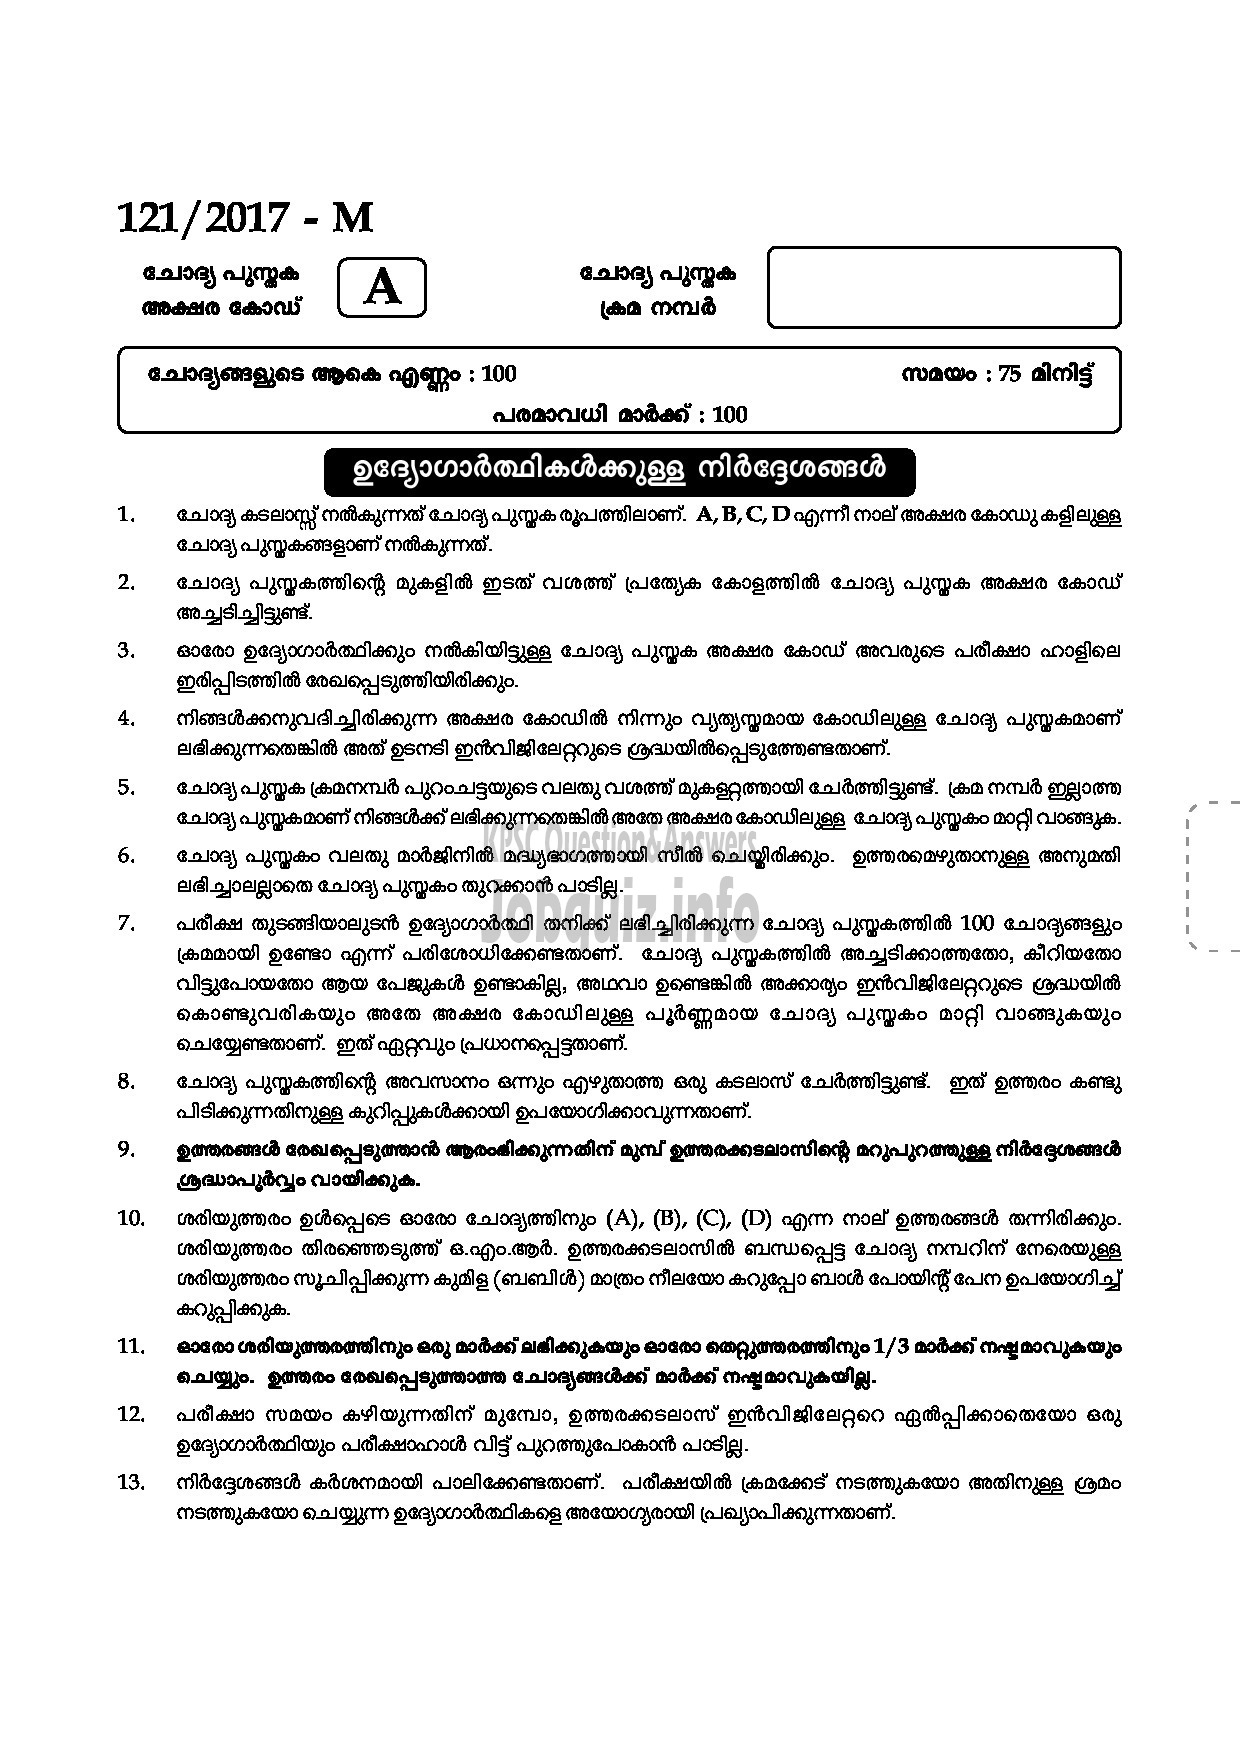 Kerala PSC Question Paper - PRE PRIMARY TEACHER EDUCATION MALAYALAM QUESTION -1